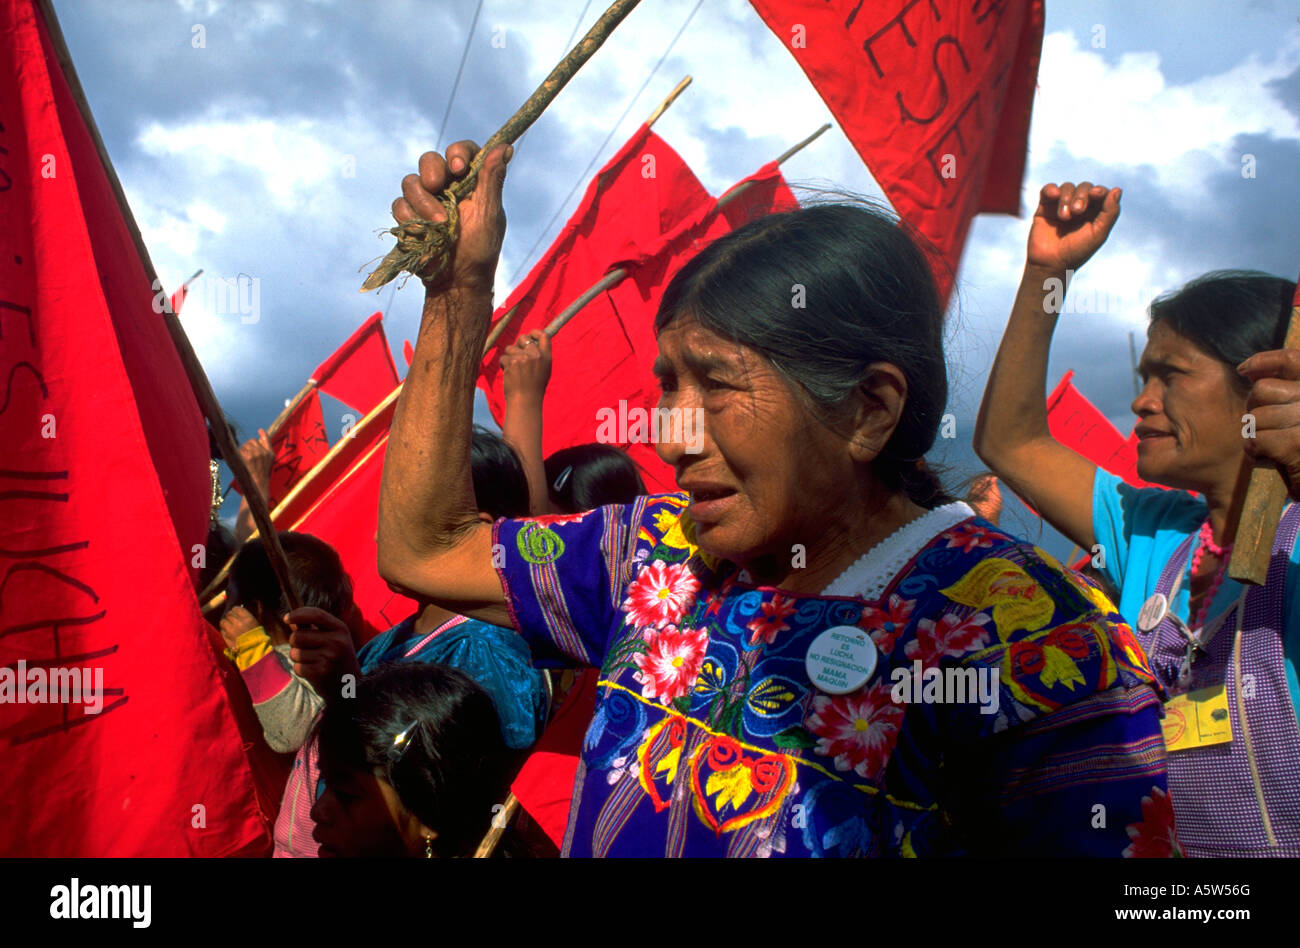 Painet hl0991 protesters waiving flags protest waving mayan guatemala woman female women females protesting leadership Stock Photo